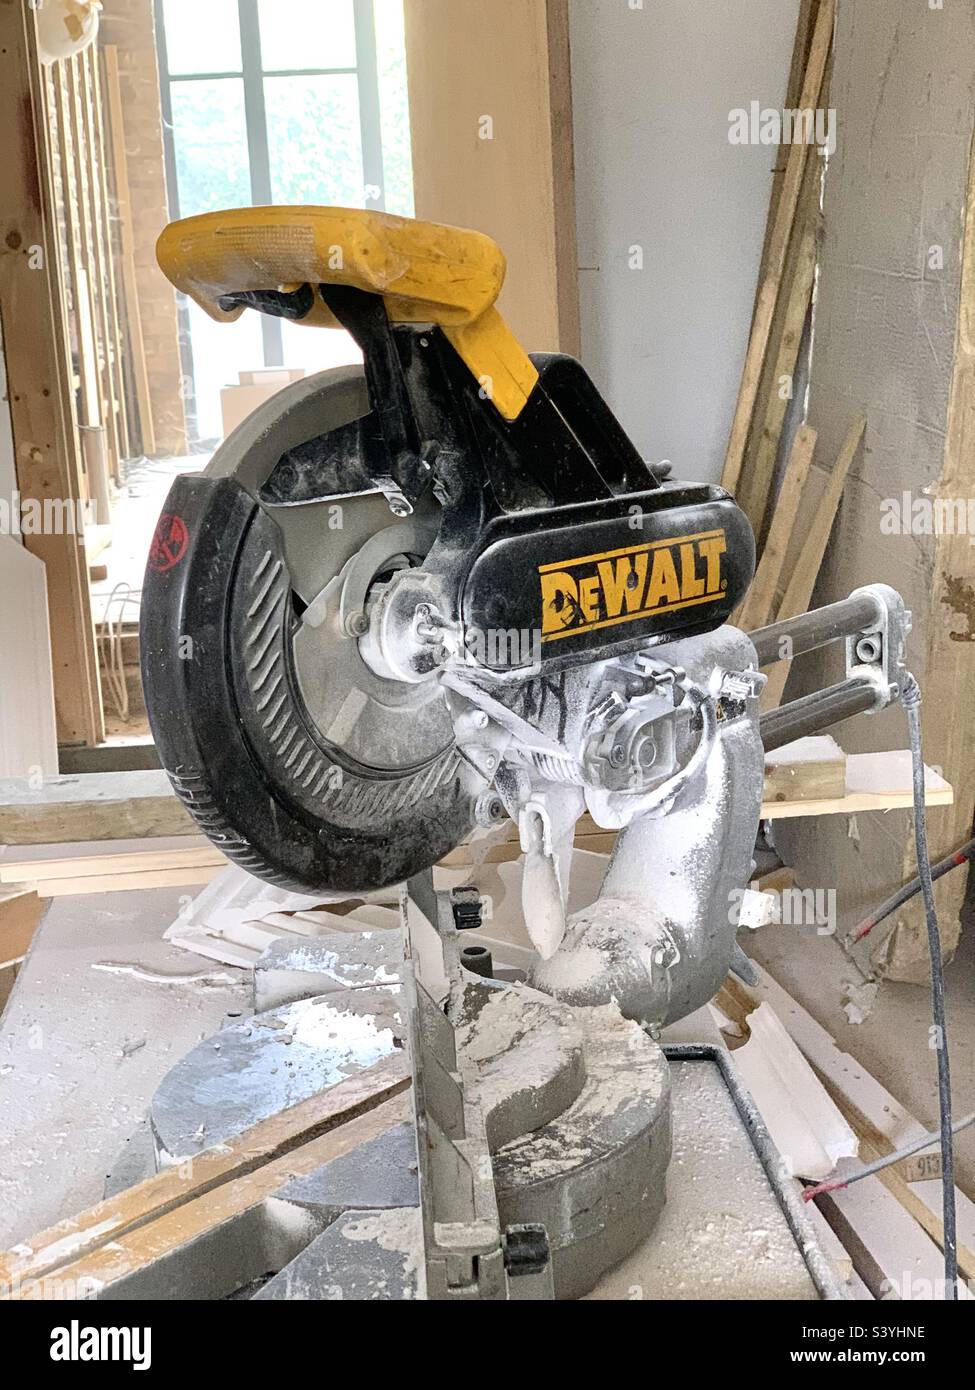 DeWalt circular saw for builders in home renovation project, London England Stock Photo